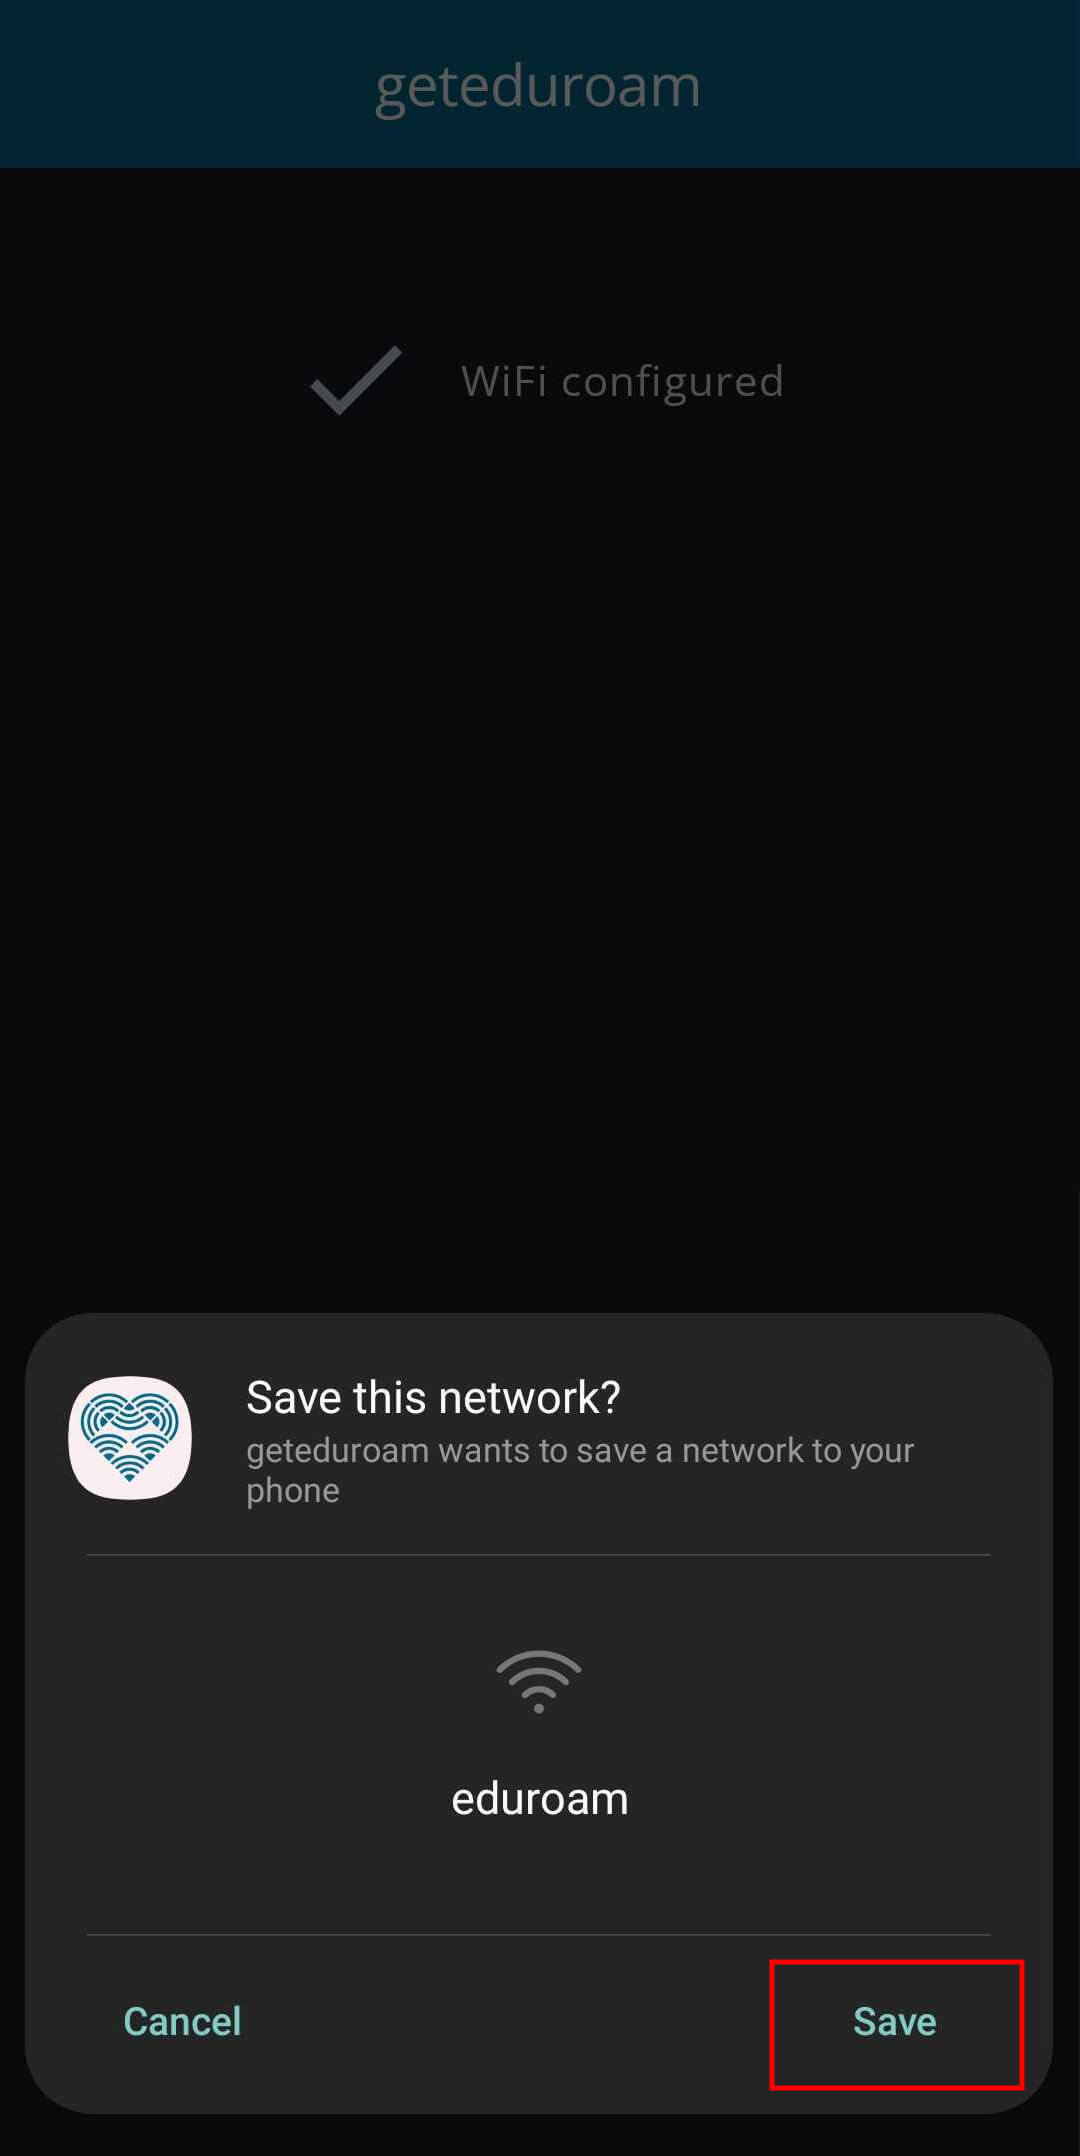 A pop-up in the geteduroam app asking for permission to save a network. There are two button options, 'Cancel' and 'Save,' and 'Save' is highlighted on the right.